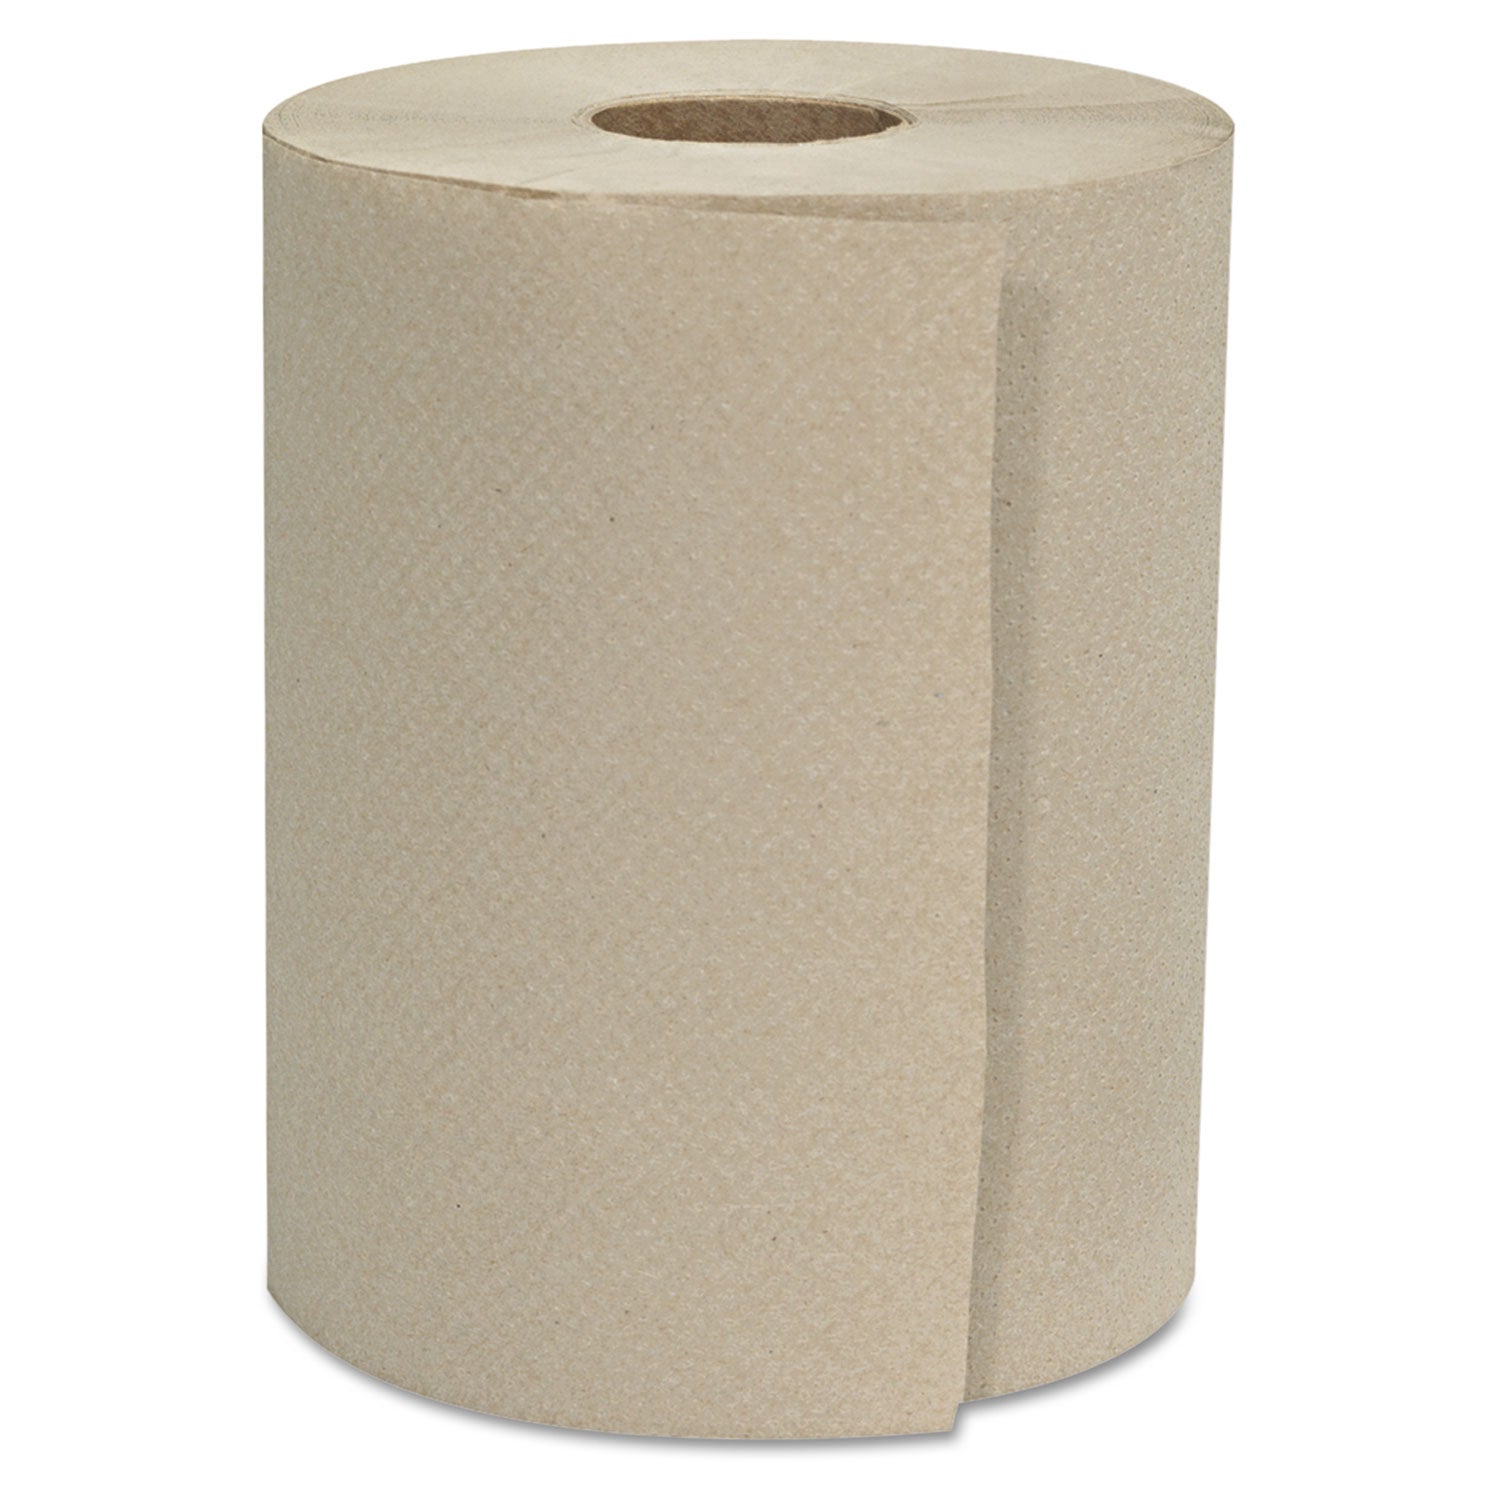 hardwound-roll-towels-1-ply-8-x-600-ft-natural-12-rolls-carton_genhwtkrft - 1